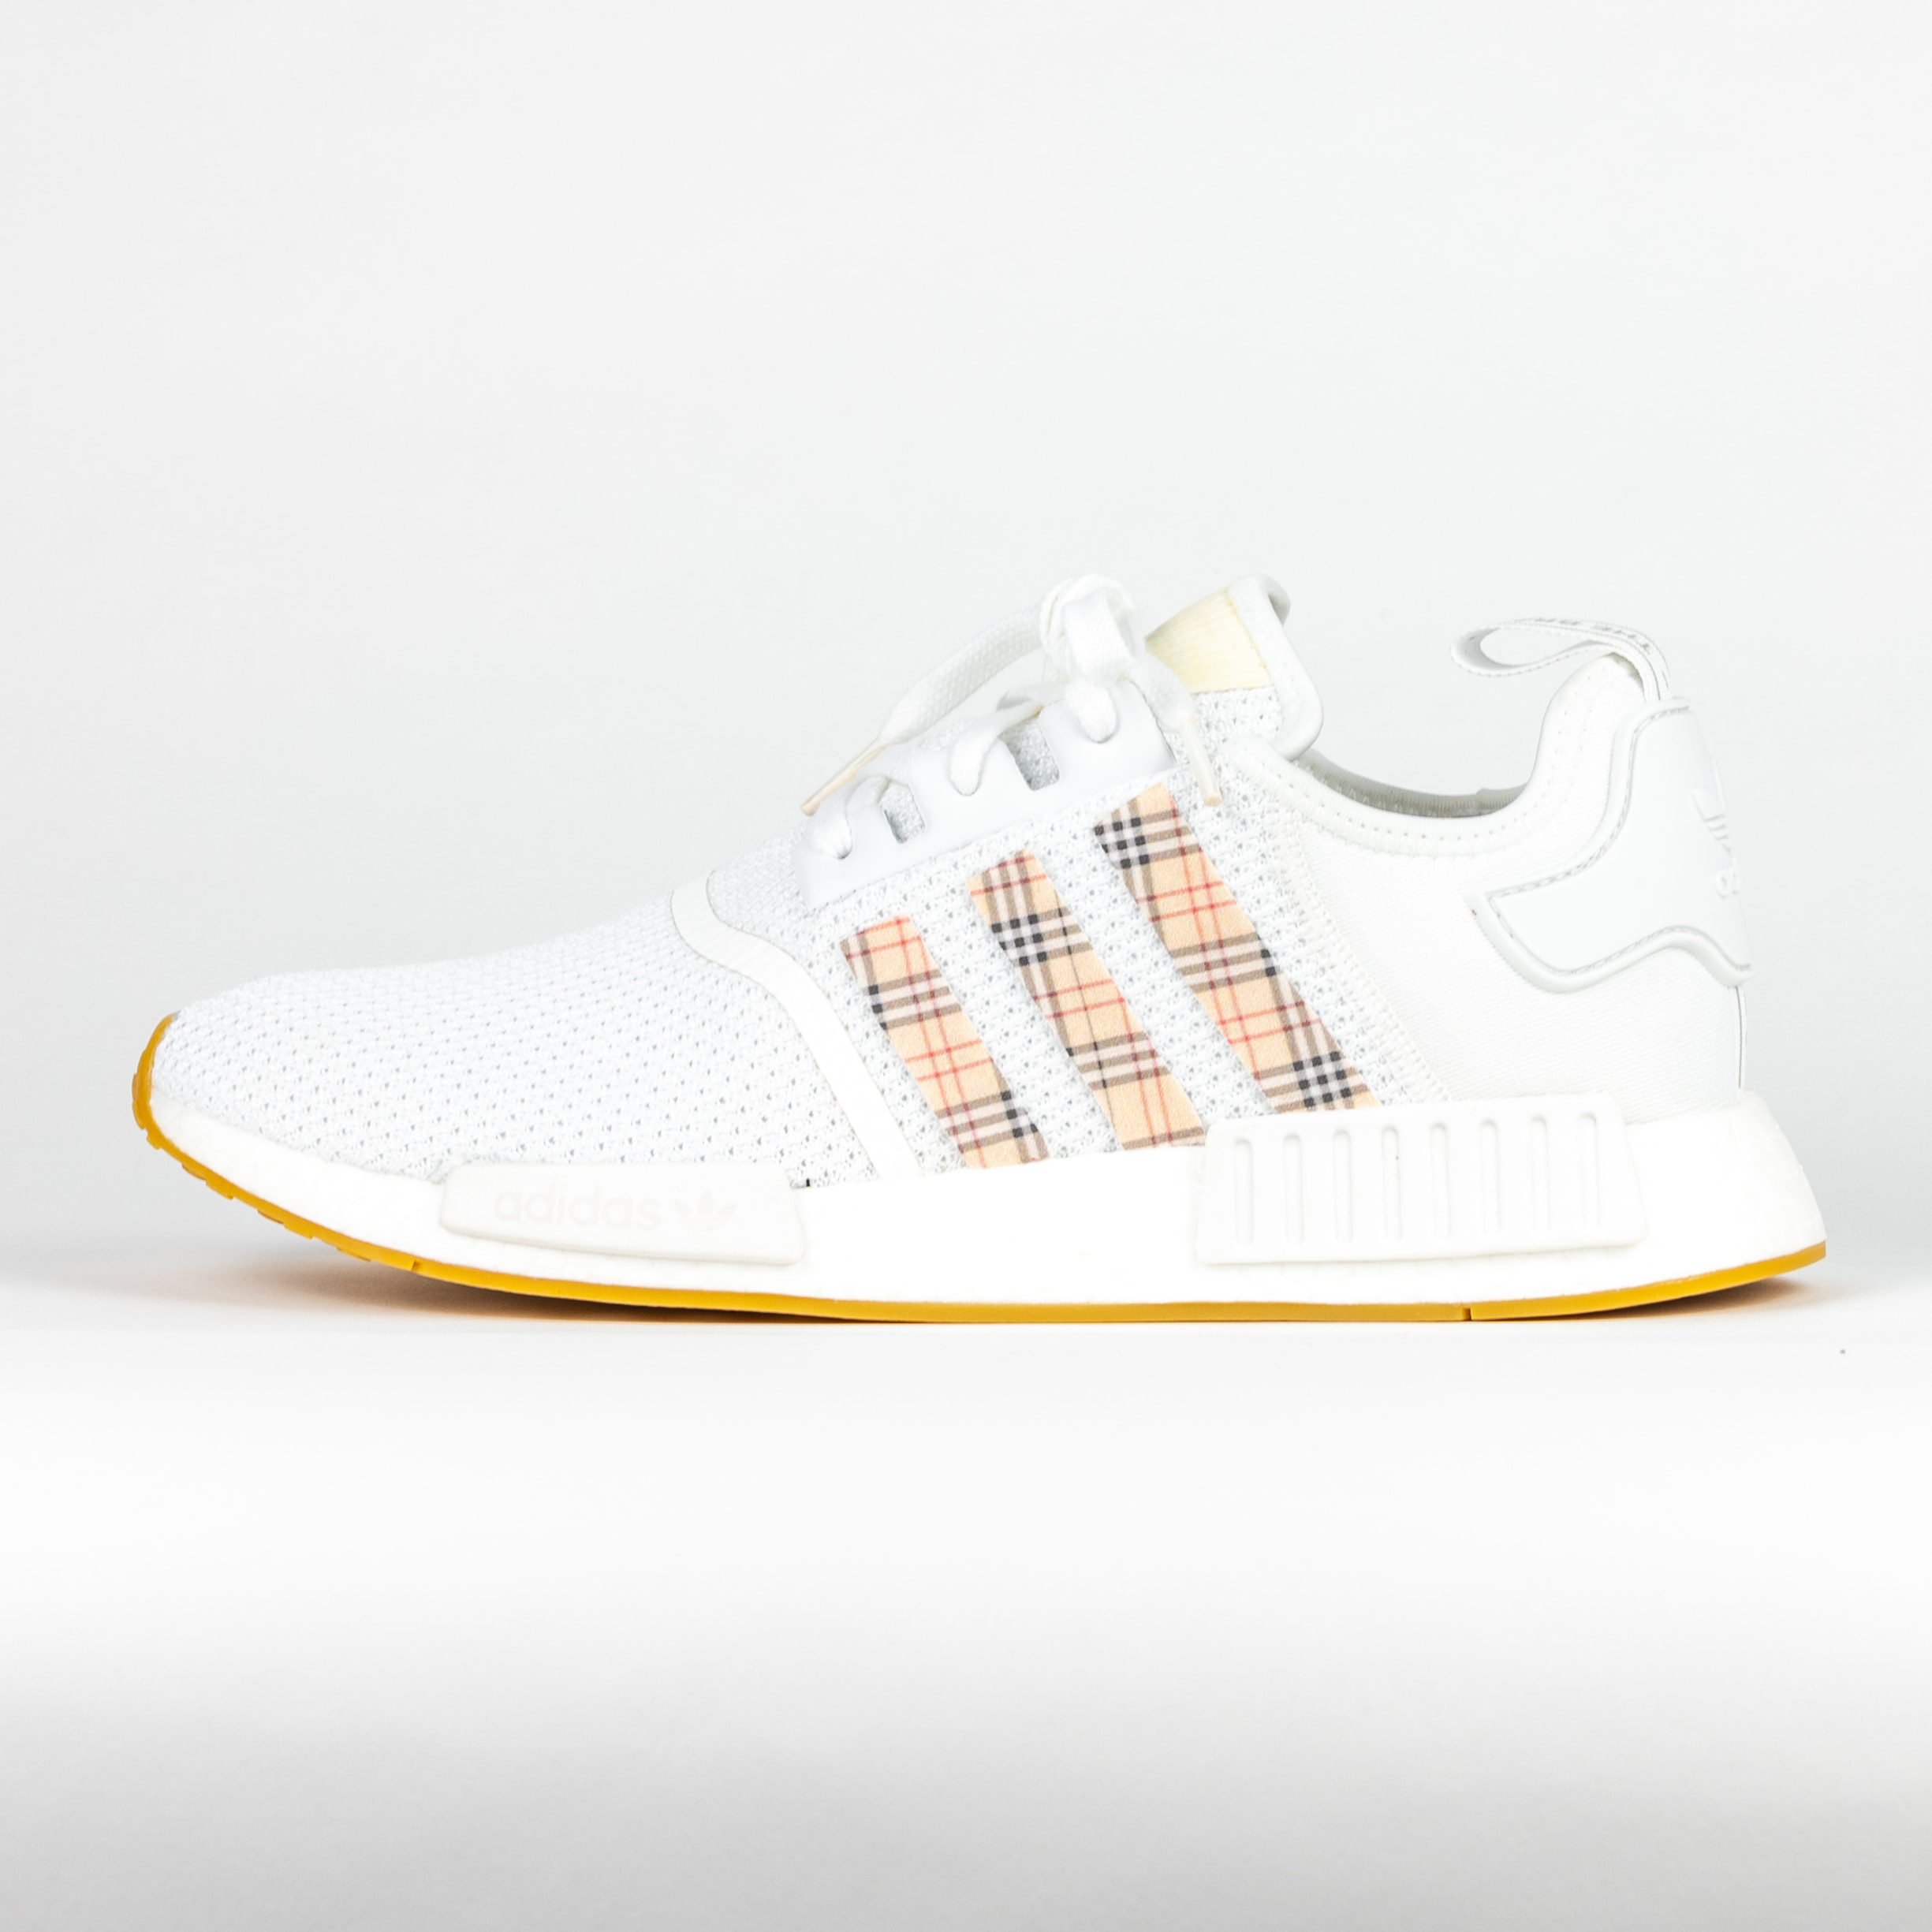 Custom Hand Painted Made To Order Adidas NMD_R1 Shoes (Men/Women)